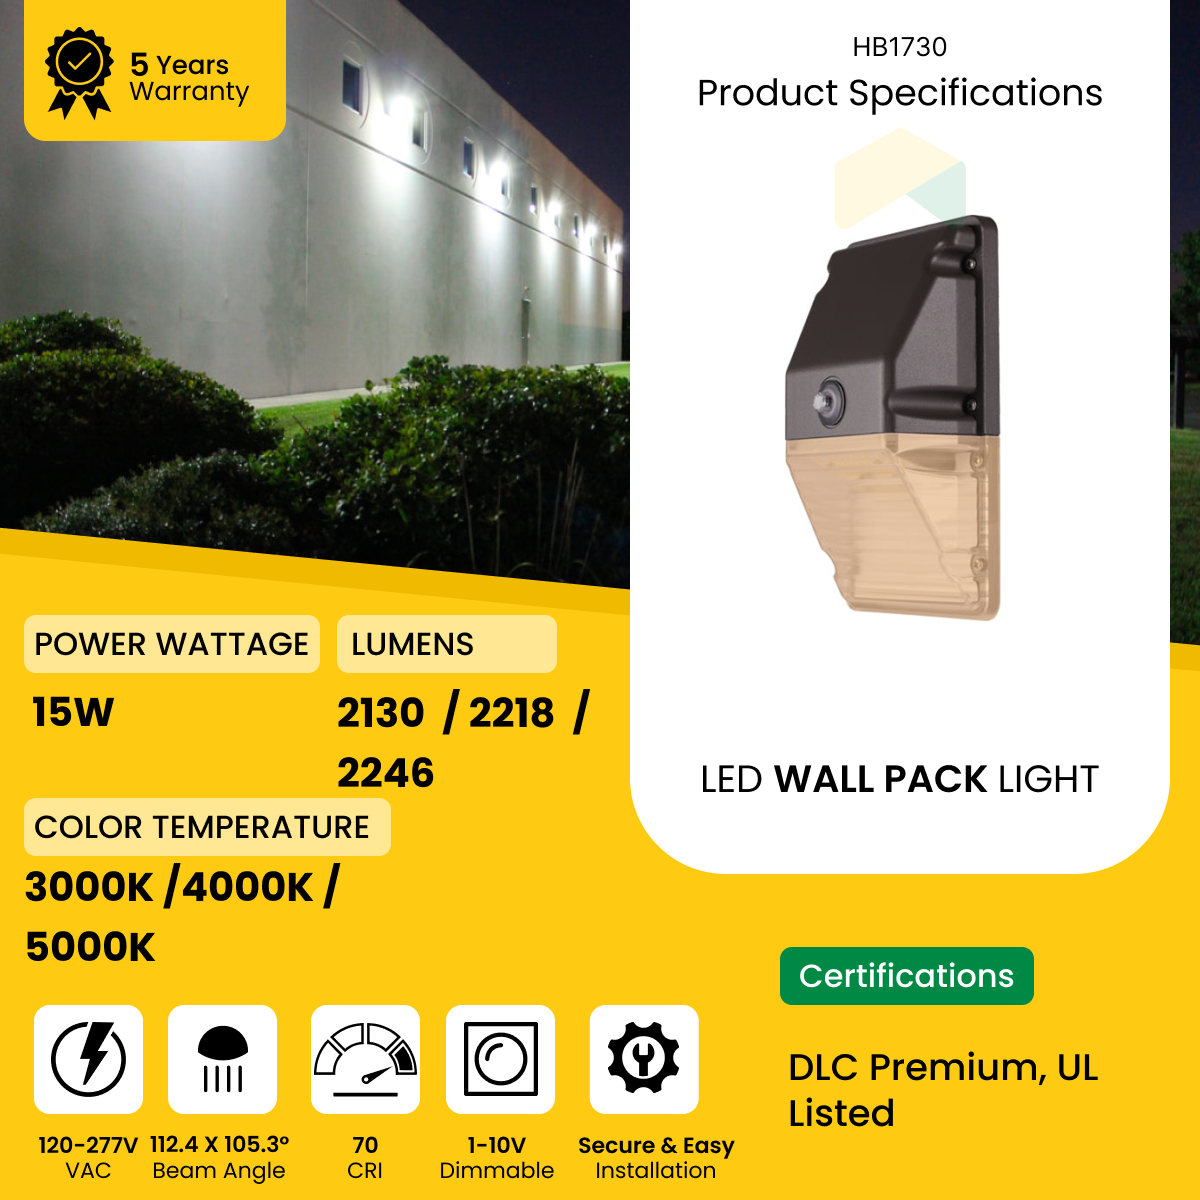 LED Mini Wall Pack Light with Photocell - 15W - 3000K/4000K/5000K  2246Lumens CCT Selectable  AC120-277V 0-10V Dimmable - IP66 - UL Listed - DLC Premium Listed - 5 Years Warranty